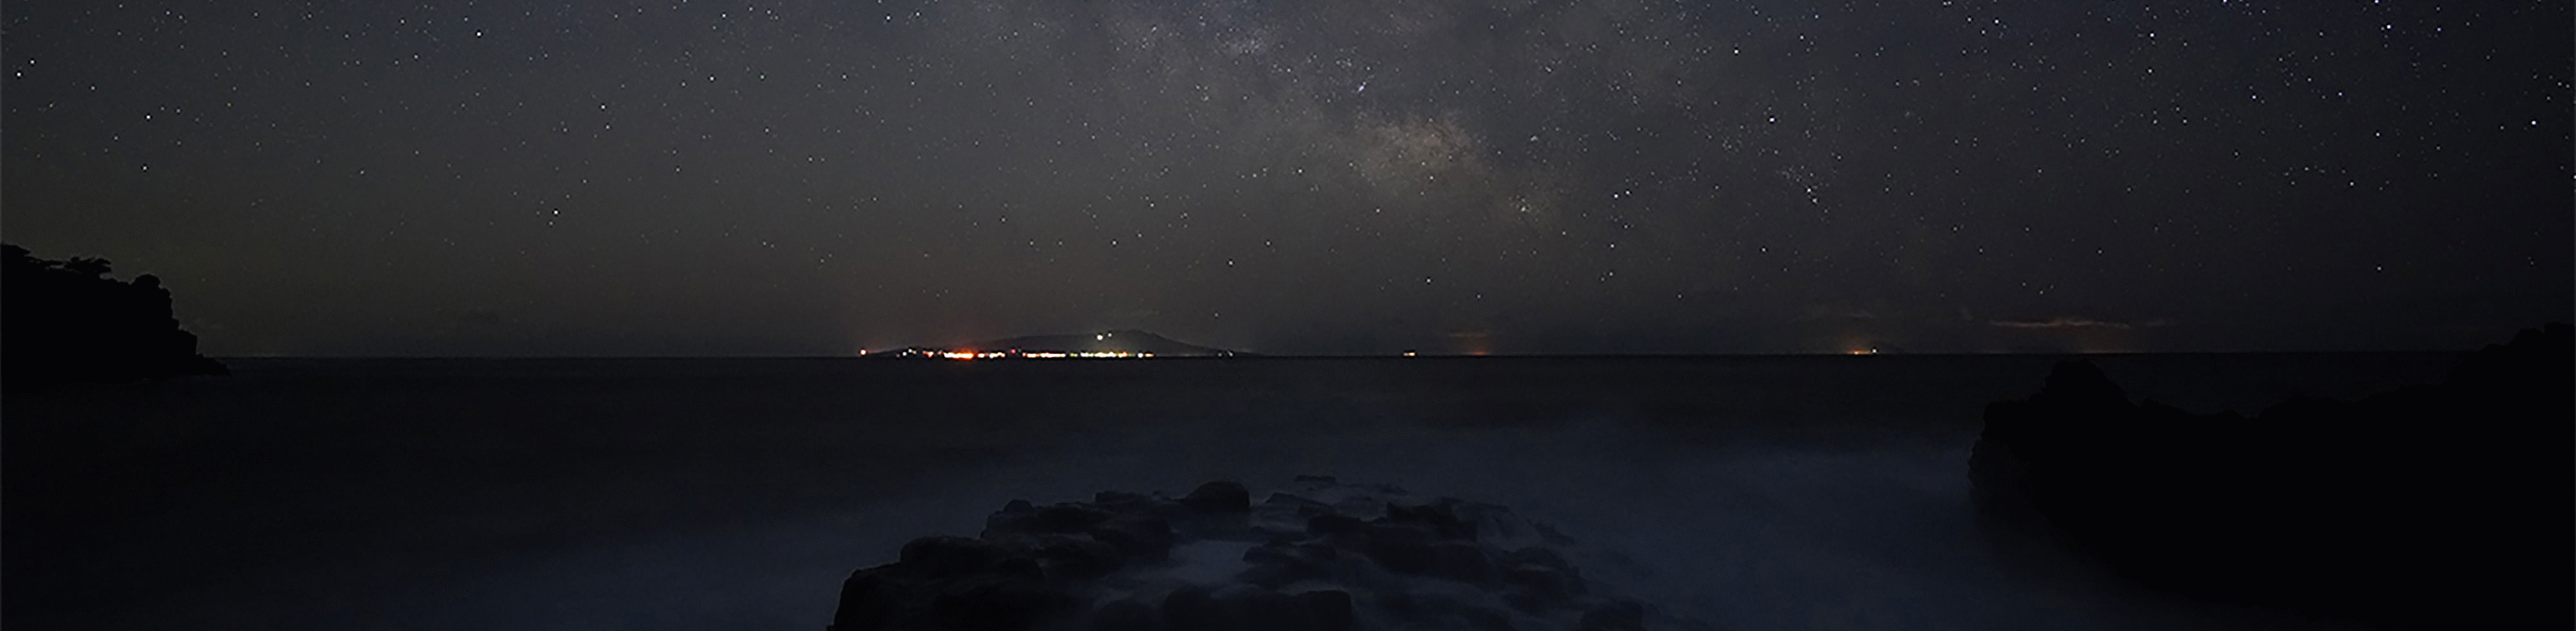 Stargazing photo showing the Milky Way over the sea